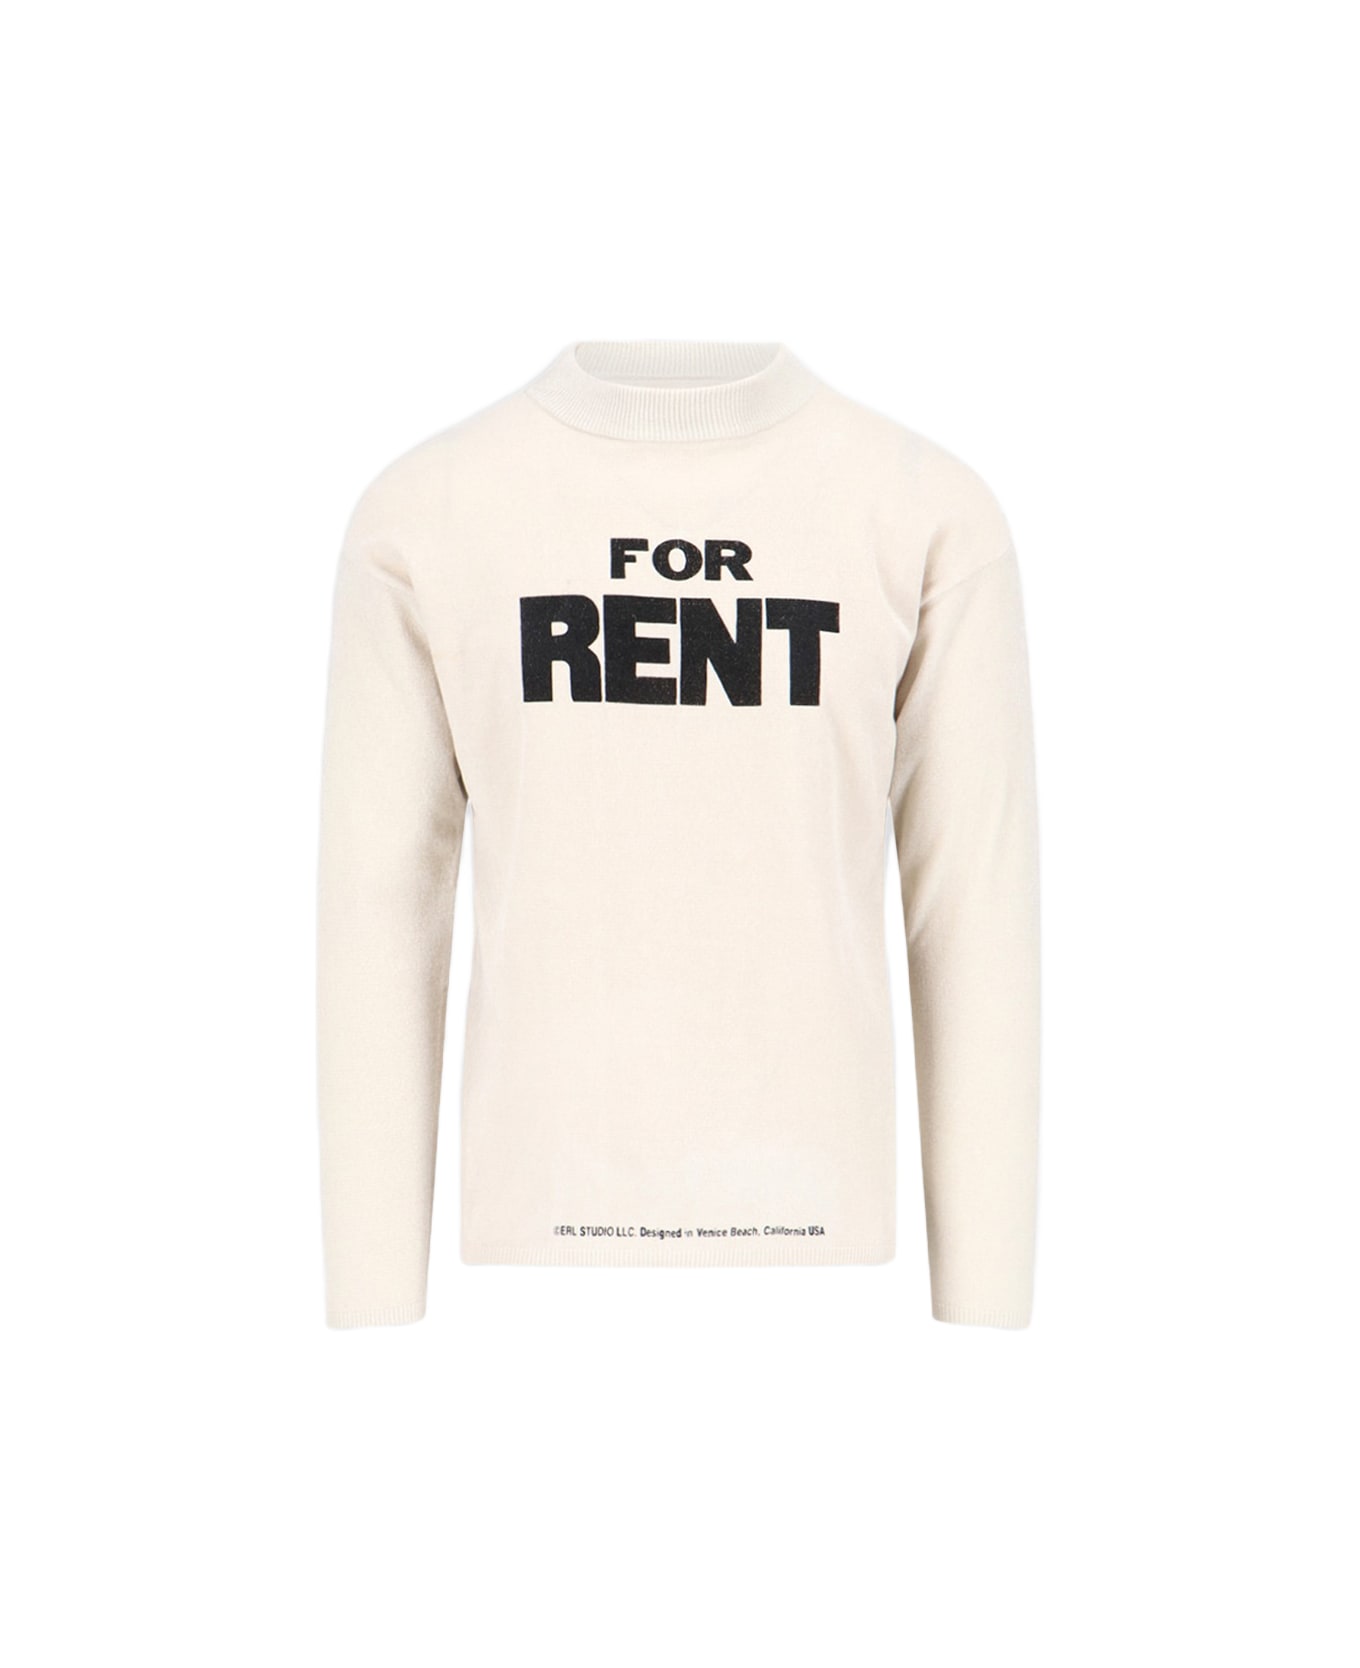 ERL Unisex For Rent Sweater Knit Off White Knitted T-shirt With Long Sleeves - Unisex For Rent Sweater Knit - WHITE